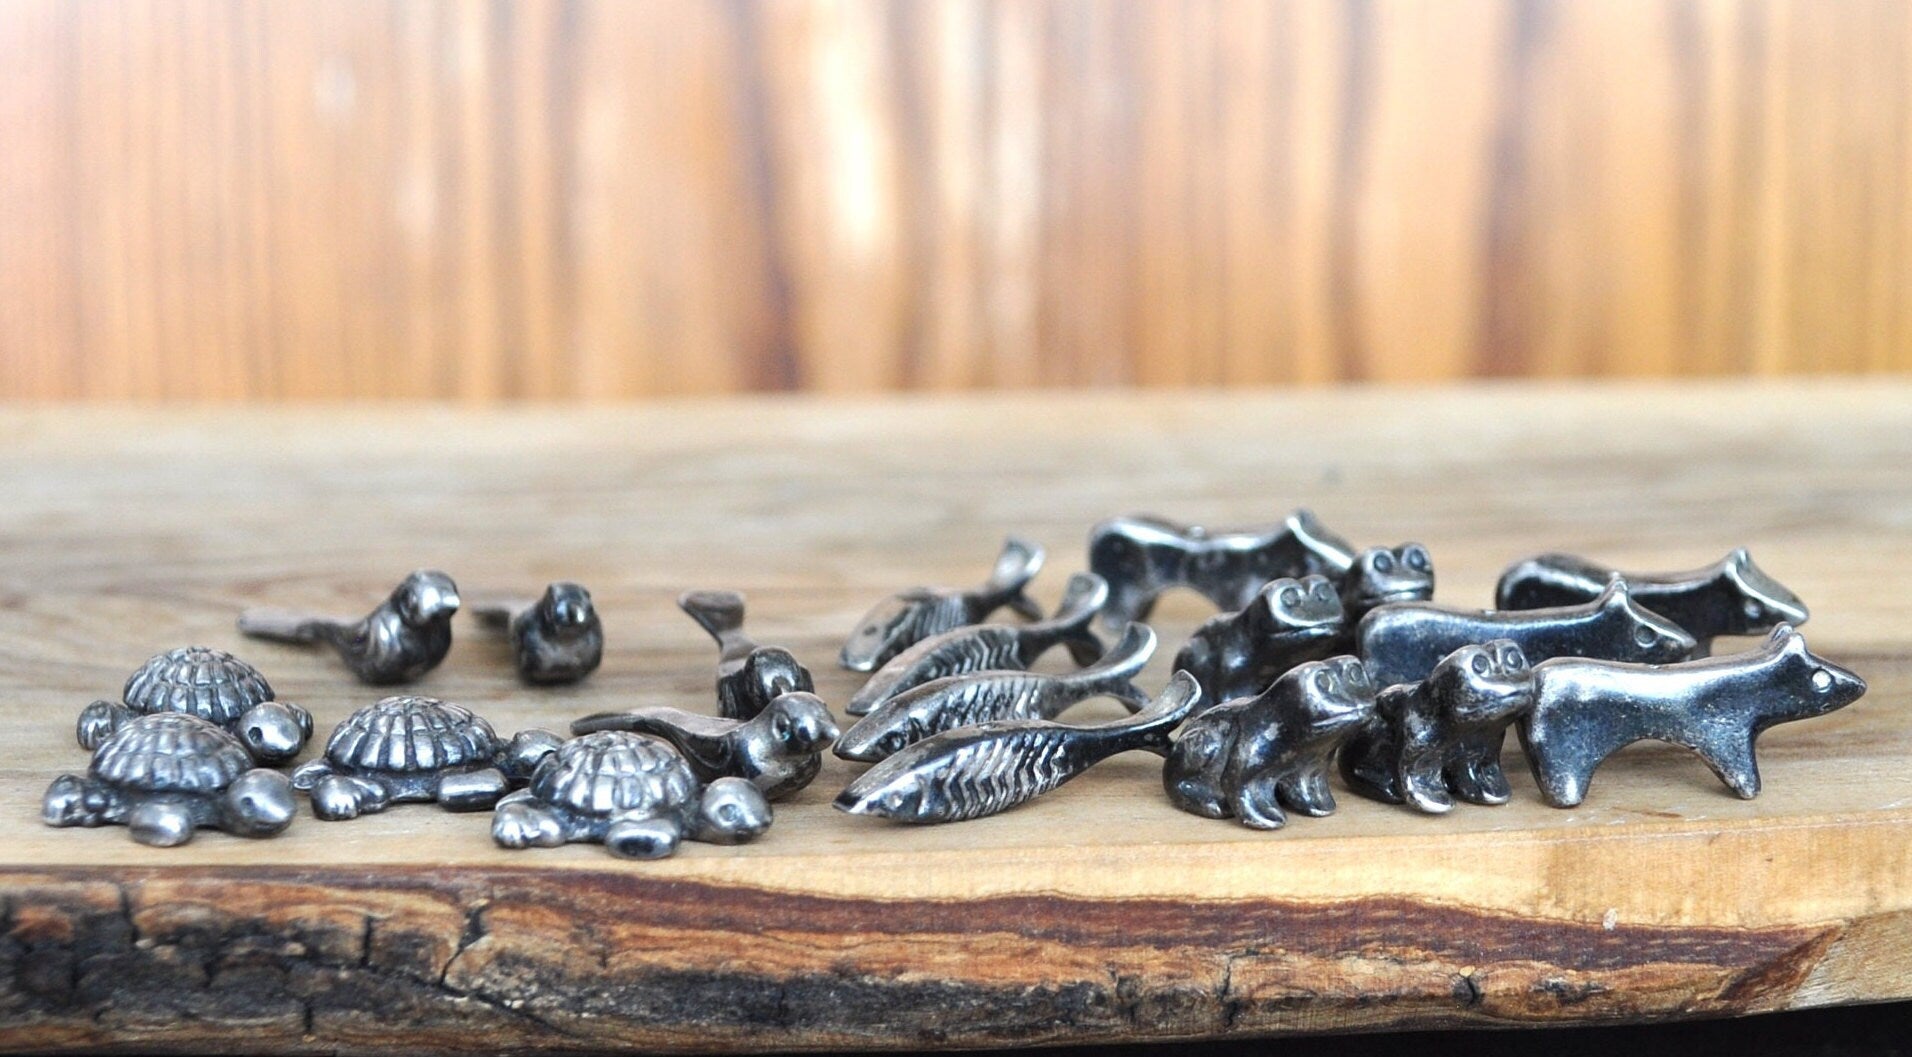 Set of 20 Antique Silver Animal Charms! Native American Sterling Charm Beads Animals Vintage Silver Charms Old, Heavy, 3.6 ounces Sterling